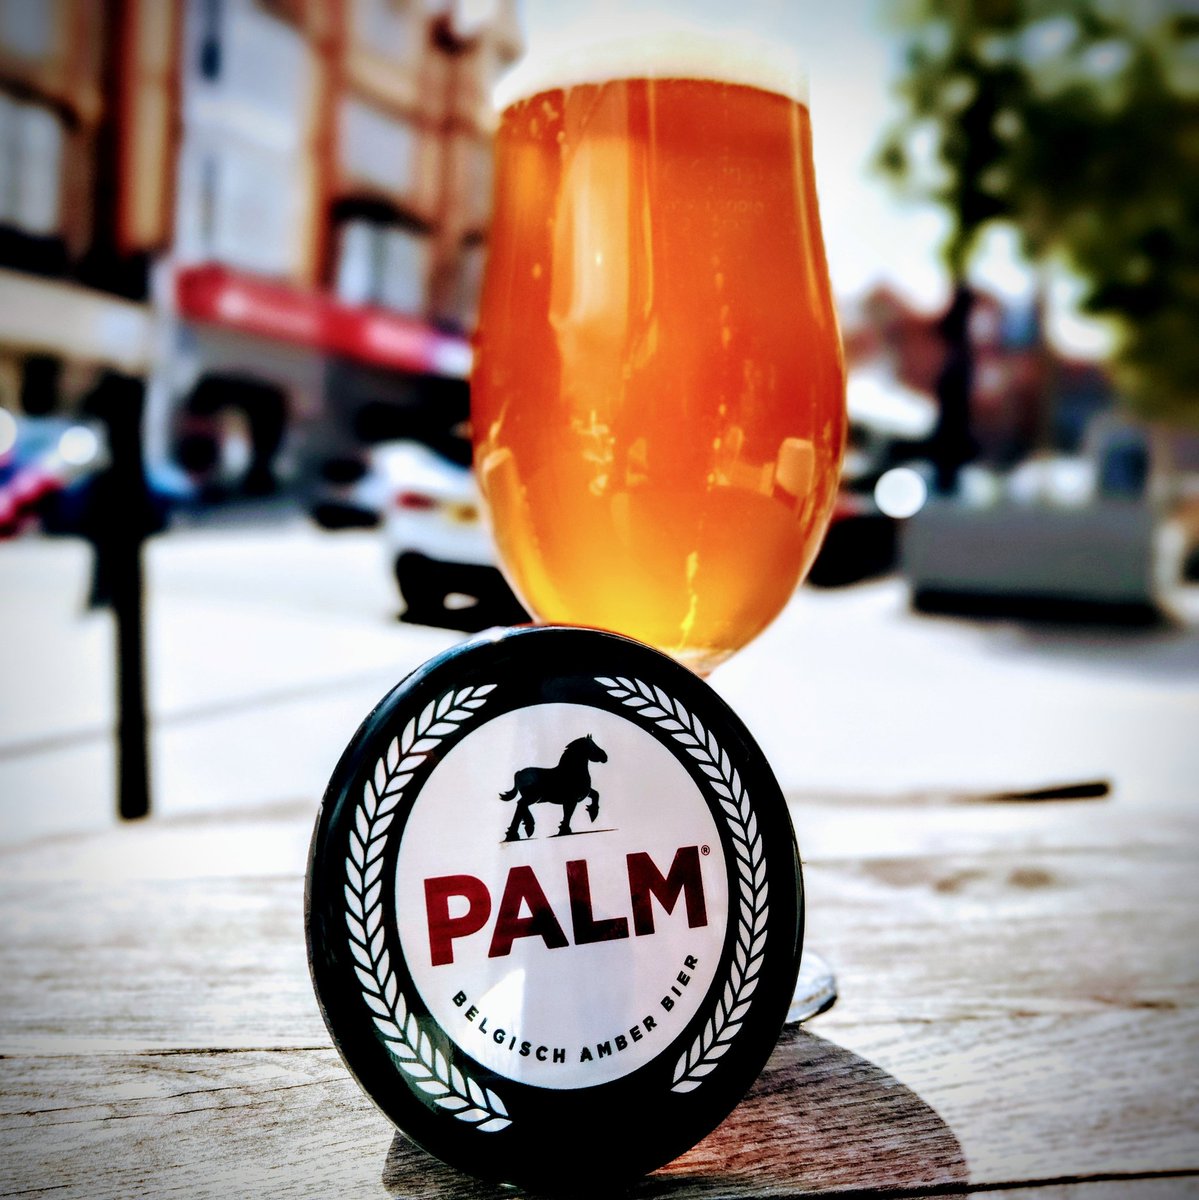 On tap now... A very rare sight in the UK - PALM Beer Belgian amber. This smooth-drinking, amber-coloured, top-fermentation beer is a very drinkable 5.4%. Special PALM malts are responsible for its honey-like mellowness, and PALM’s own selected yeasts give it a fruity yeast aroma